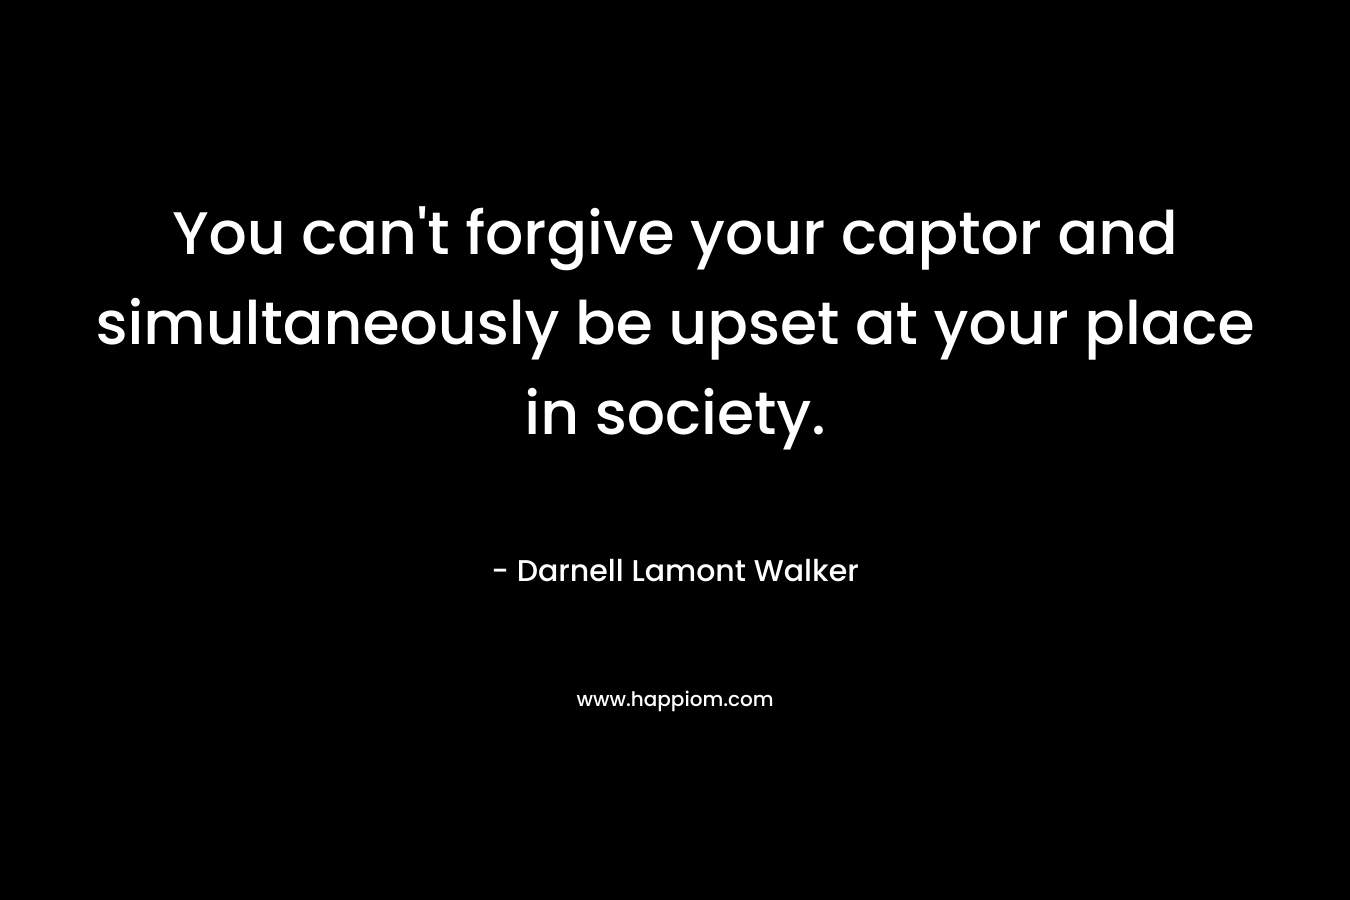 You can’t forgive your captor and simultaneously be upset at your place in society. – Darnell Lamont Walker